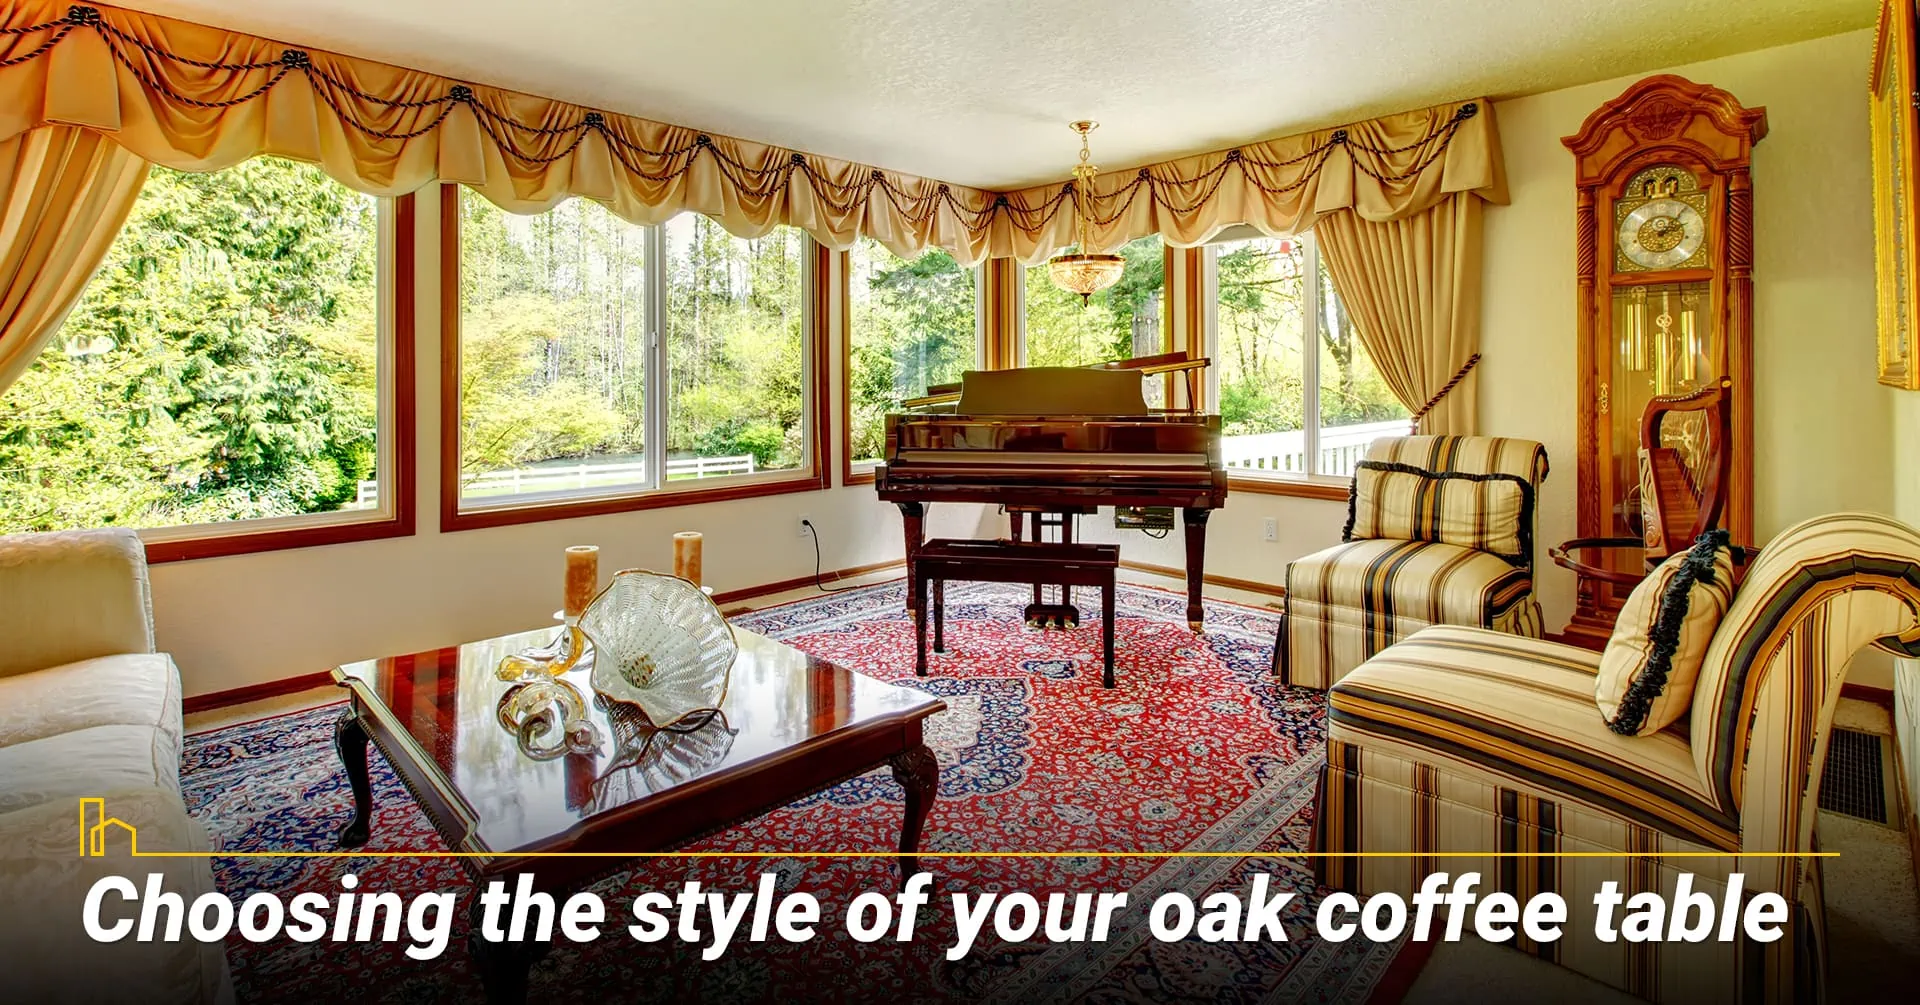 4. Choosing the style of your oak coffee table